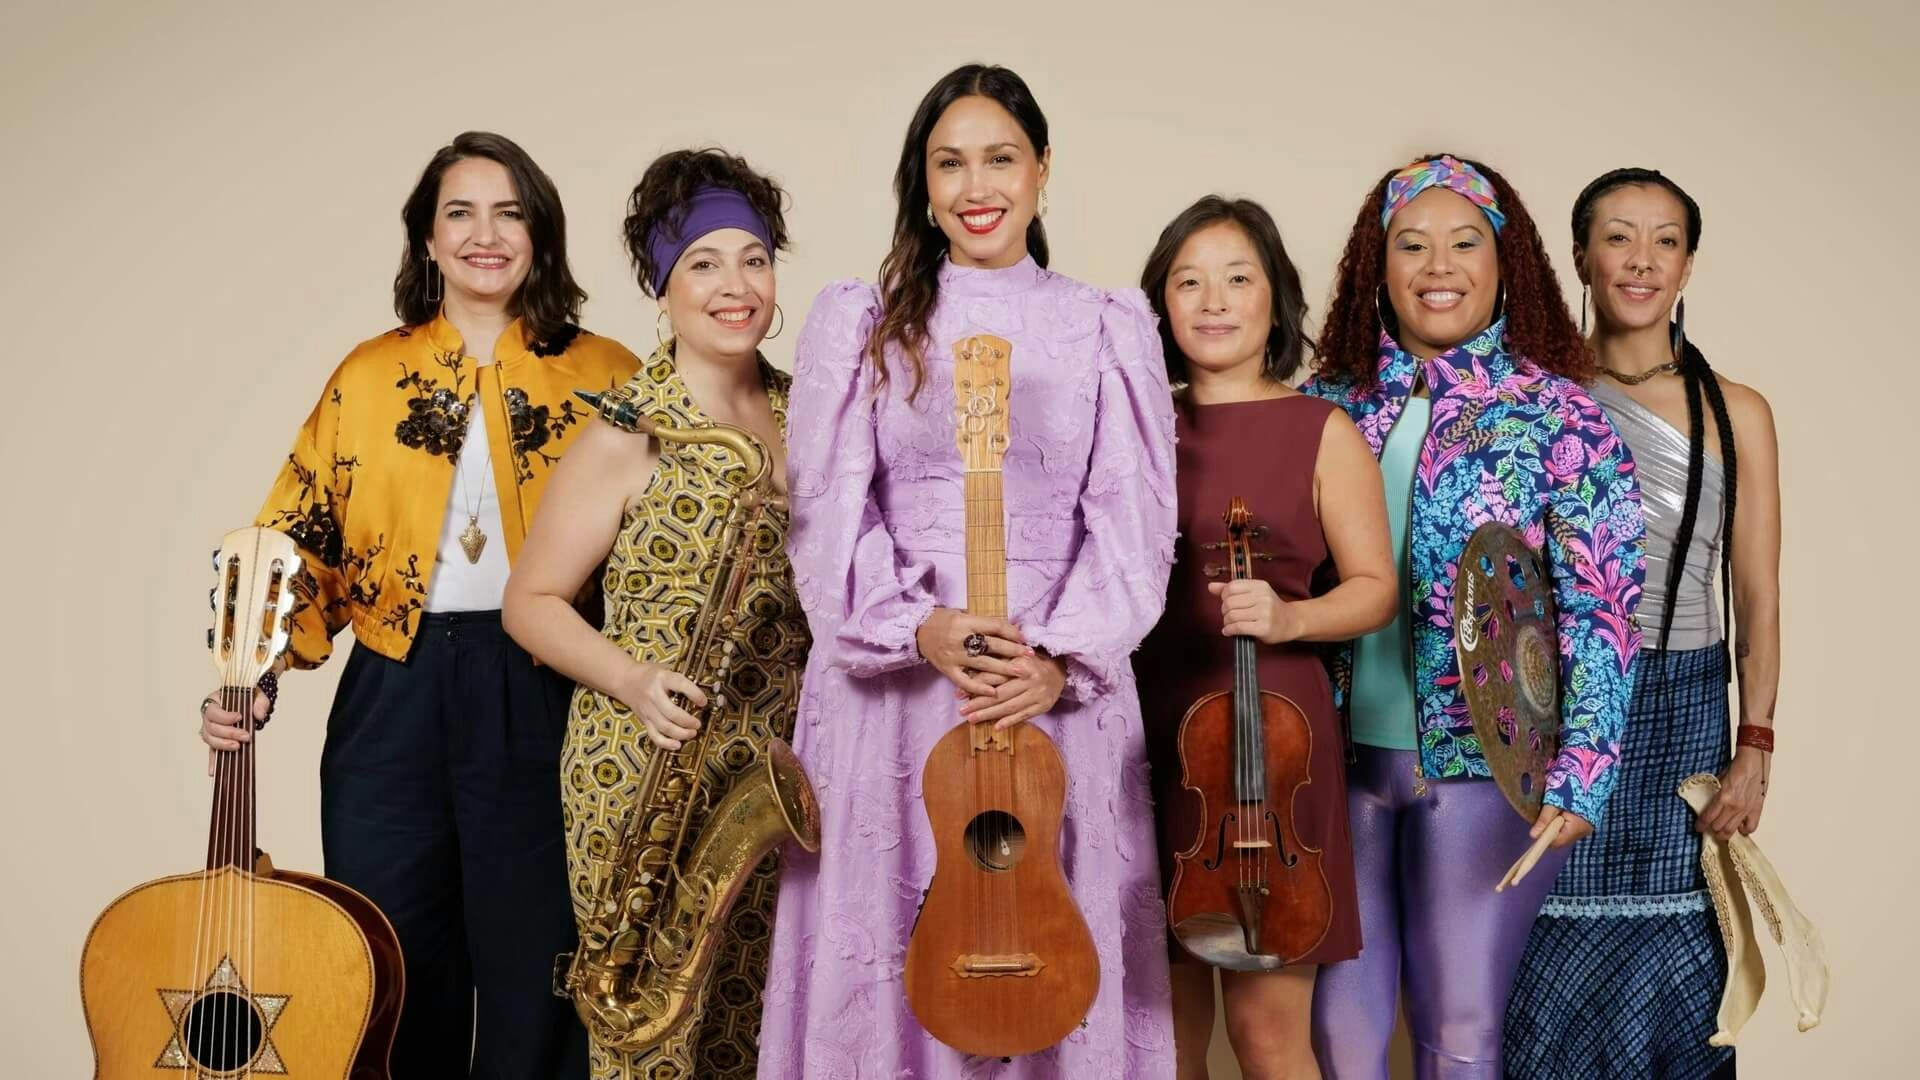 Six women in colorful clothing smile and stand side by side in a line while holding instruments